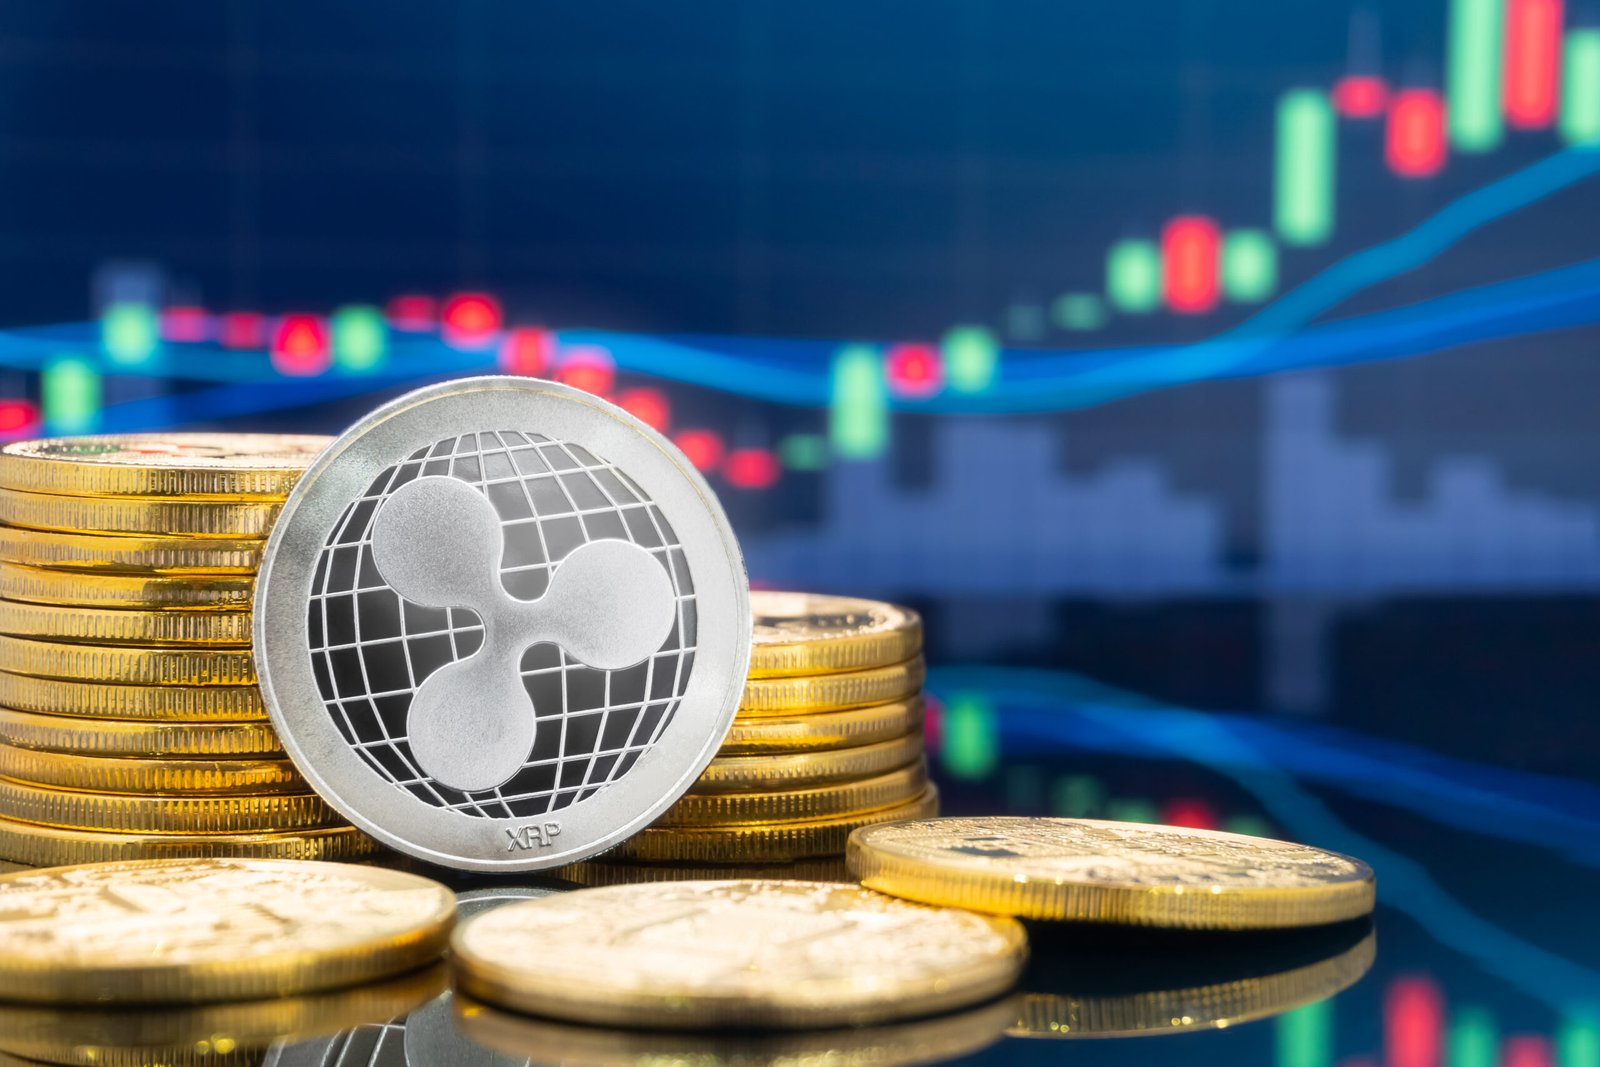 Ripple (XRP) and cryptocurrency investing